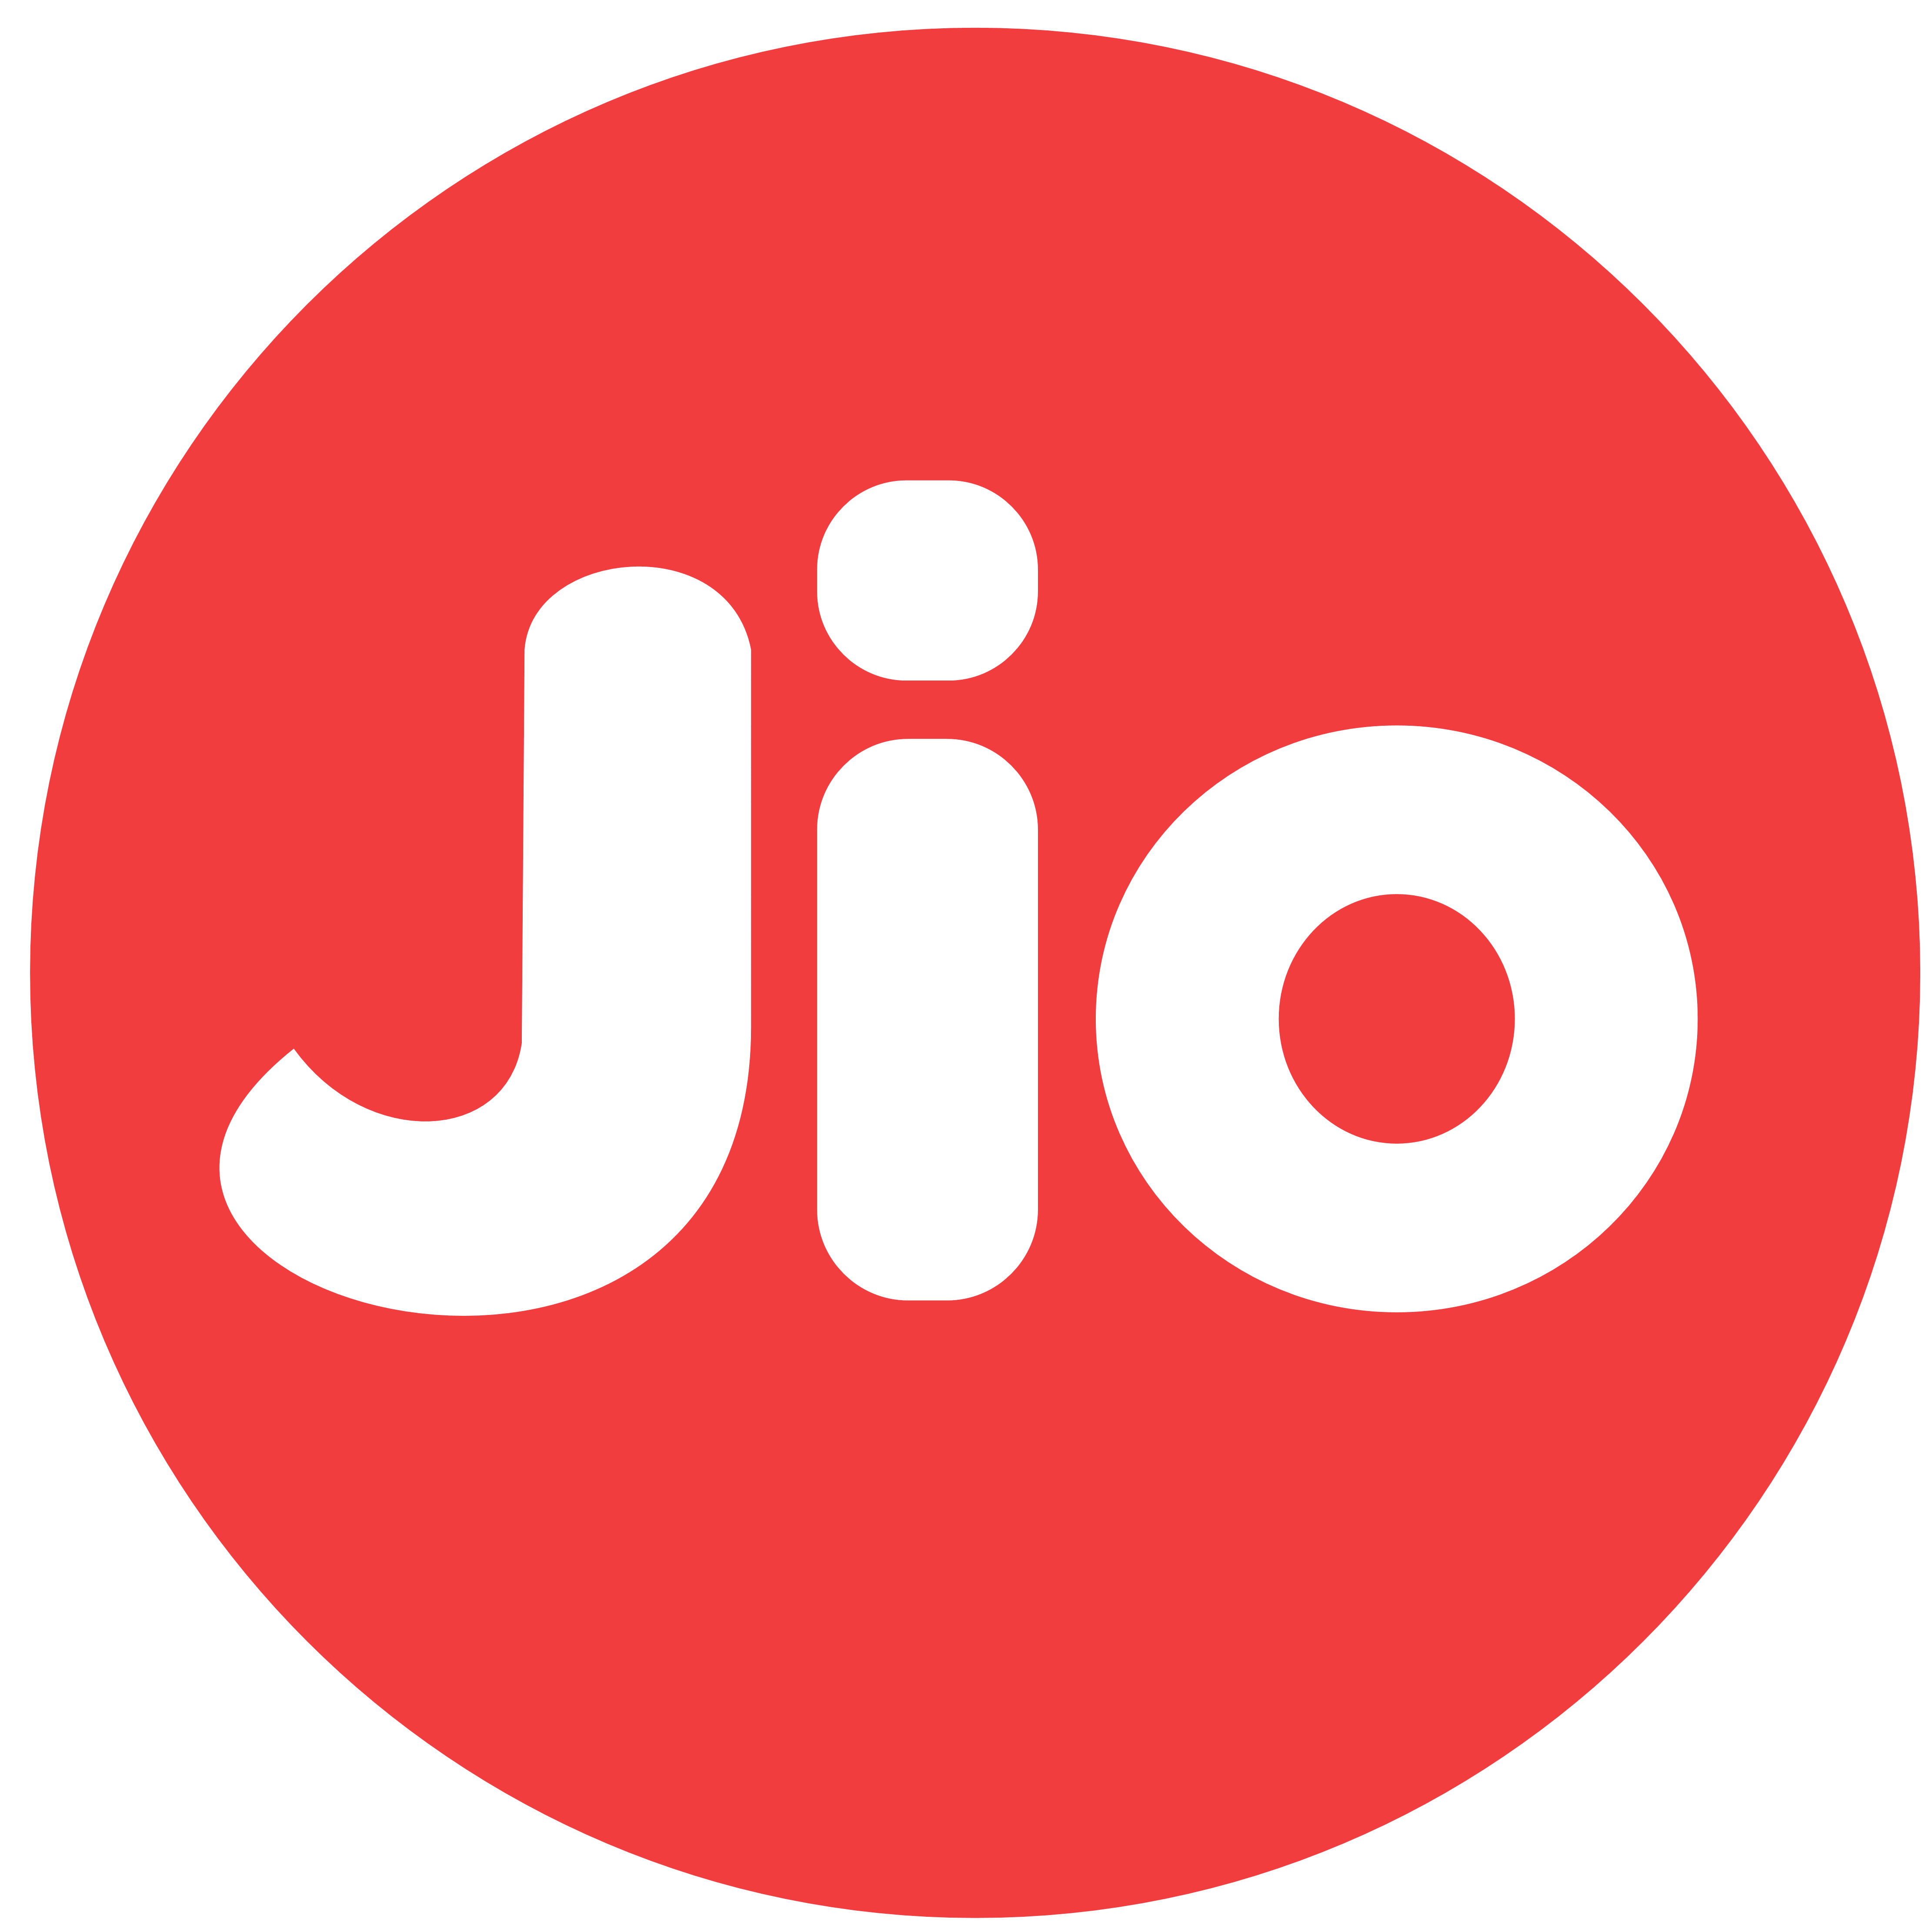 Hd Wallpapers 1080p For Jio Phone Download